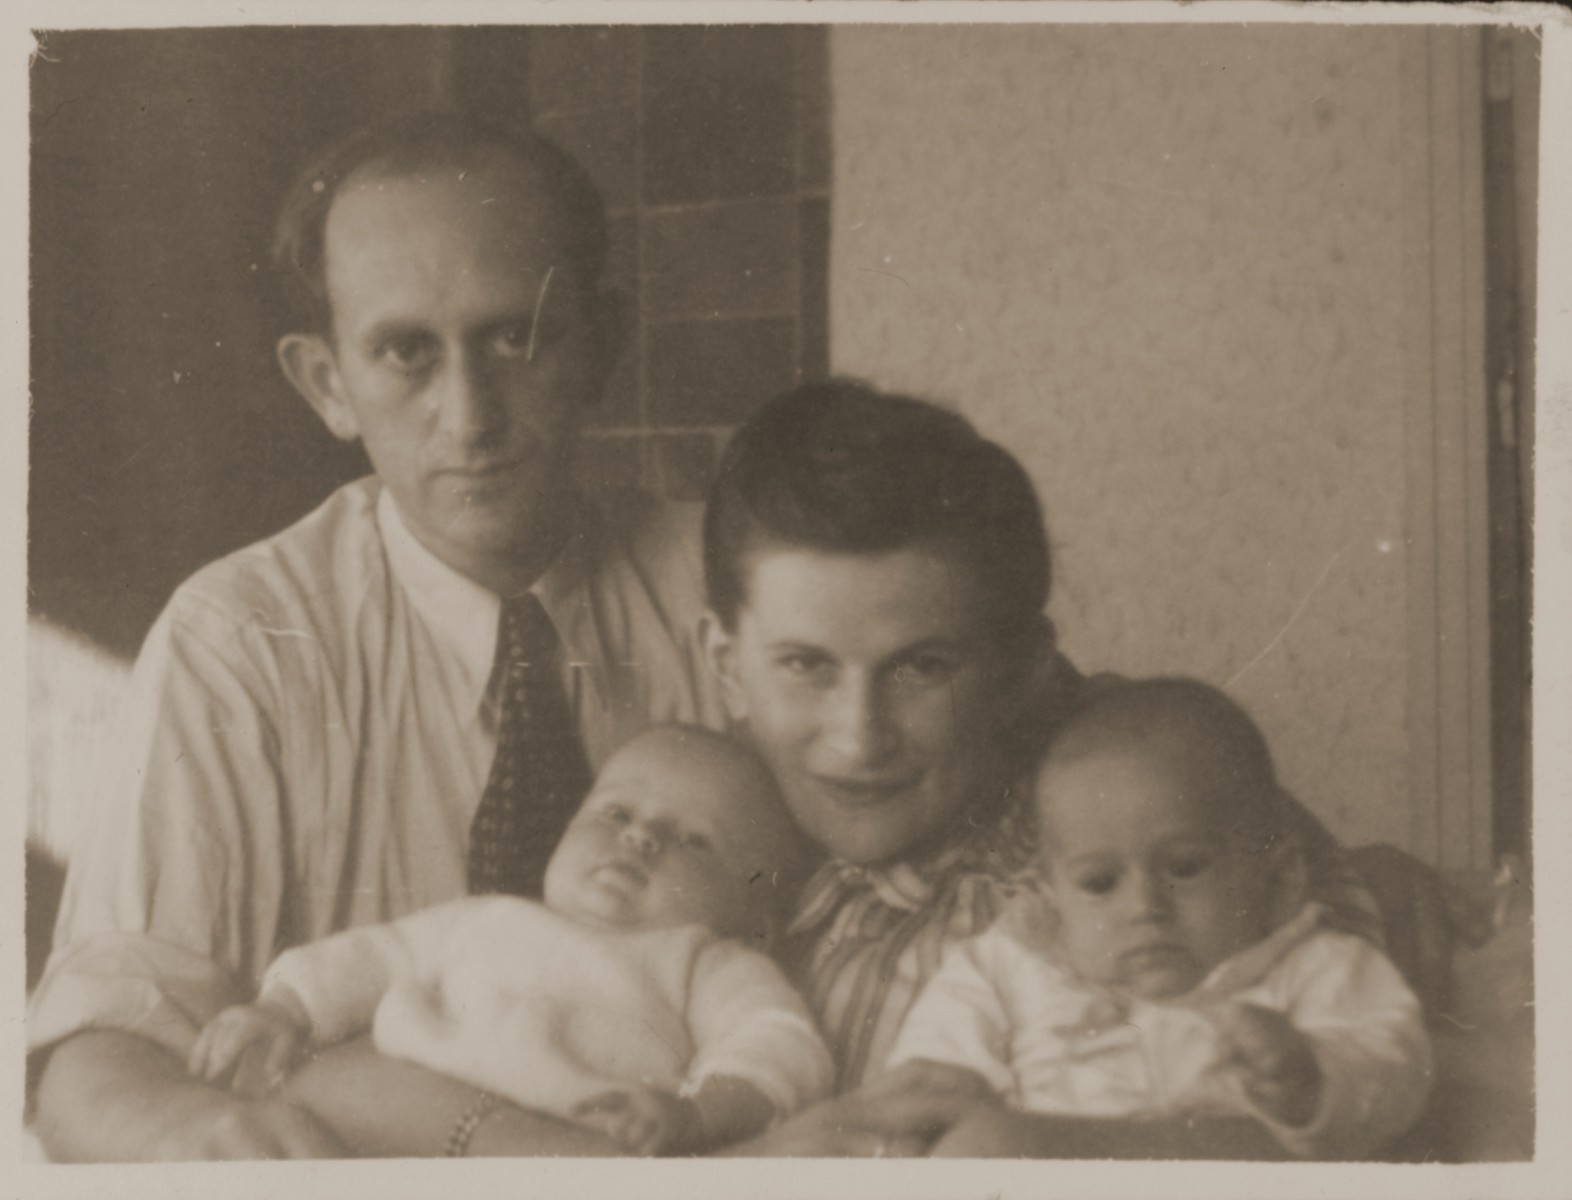 A Jewish DP couple poses with their infant twins.

Pictured are Rachmiel and Eva Zyngier with their children, Yaffa and Yizhak.  Both were from Starachowice and were survivors of the Bergen-Belsen concentration camp.